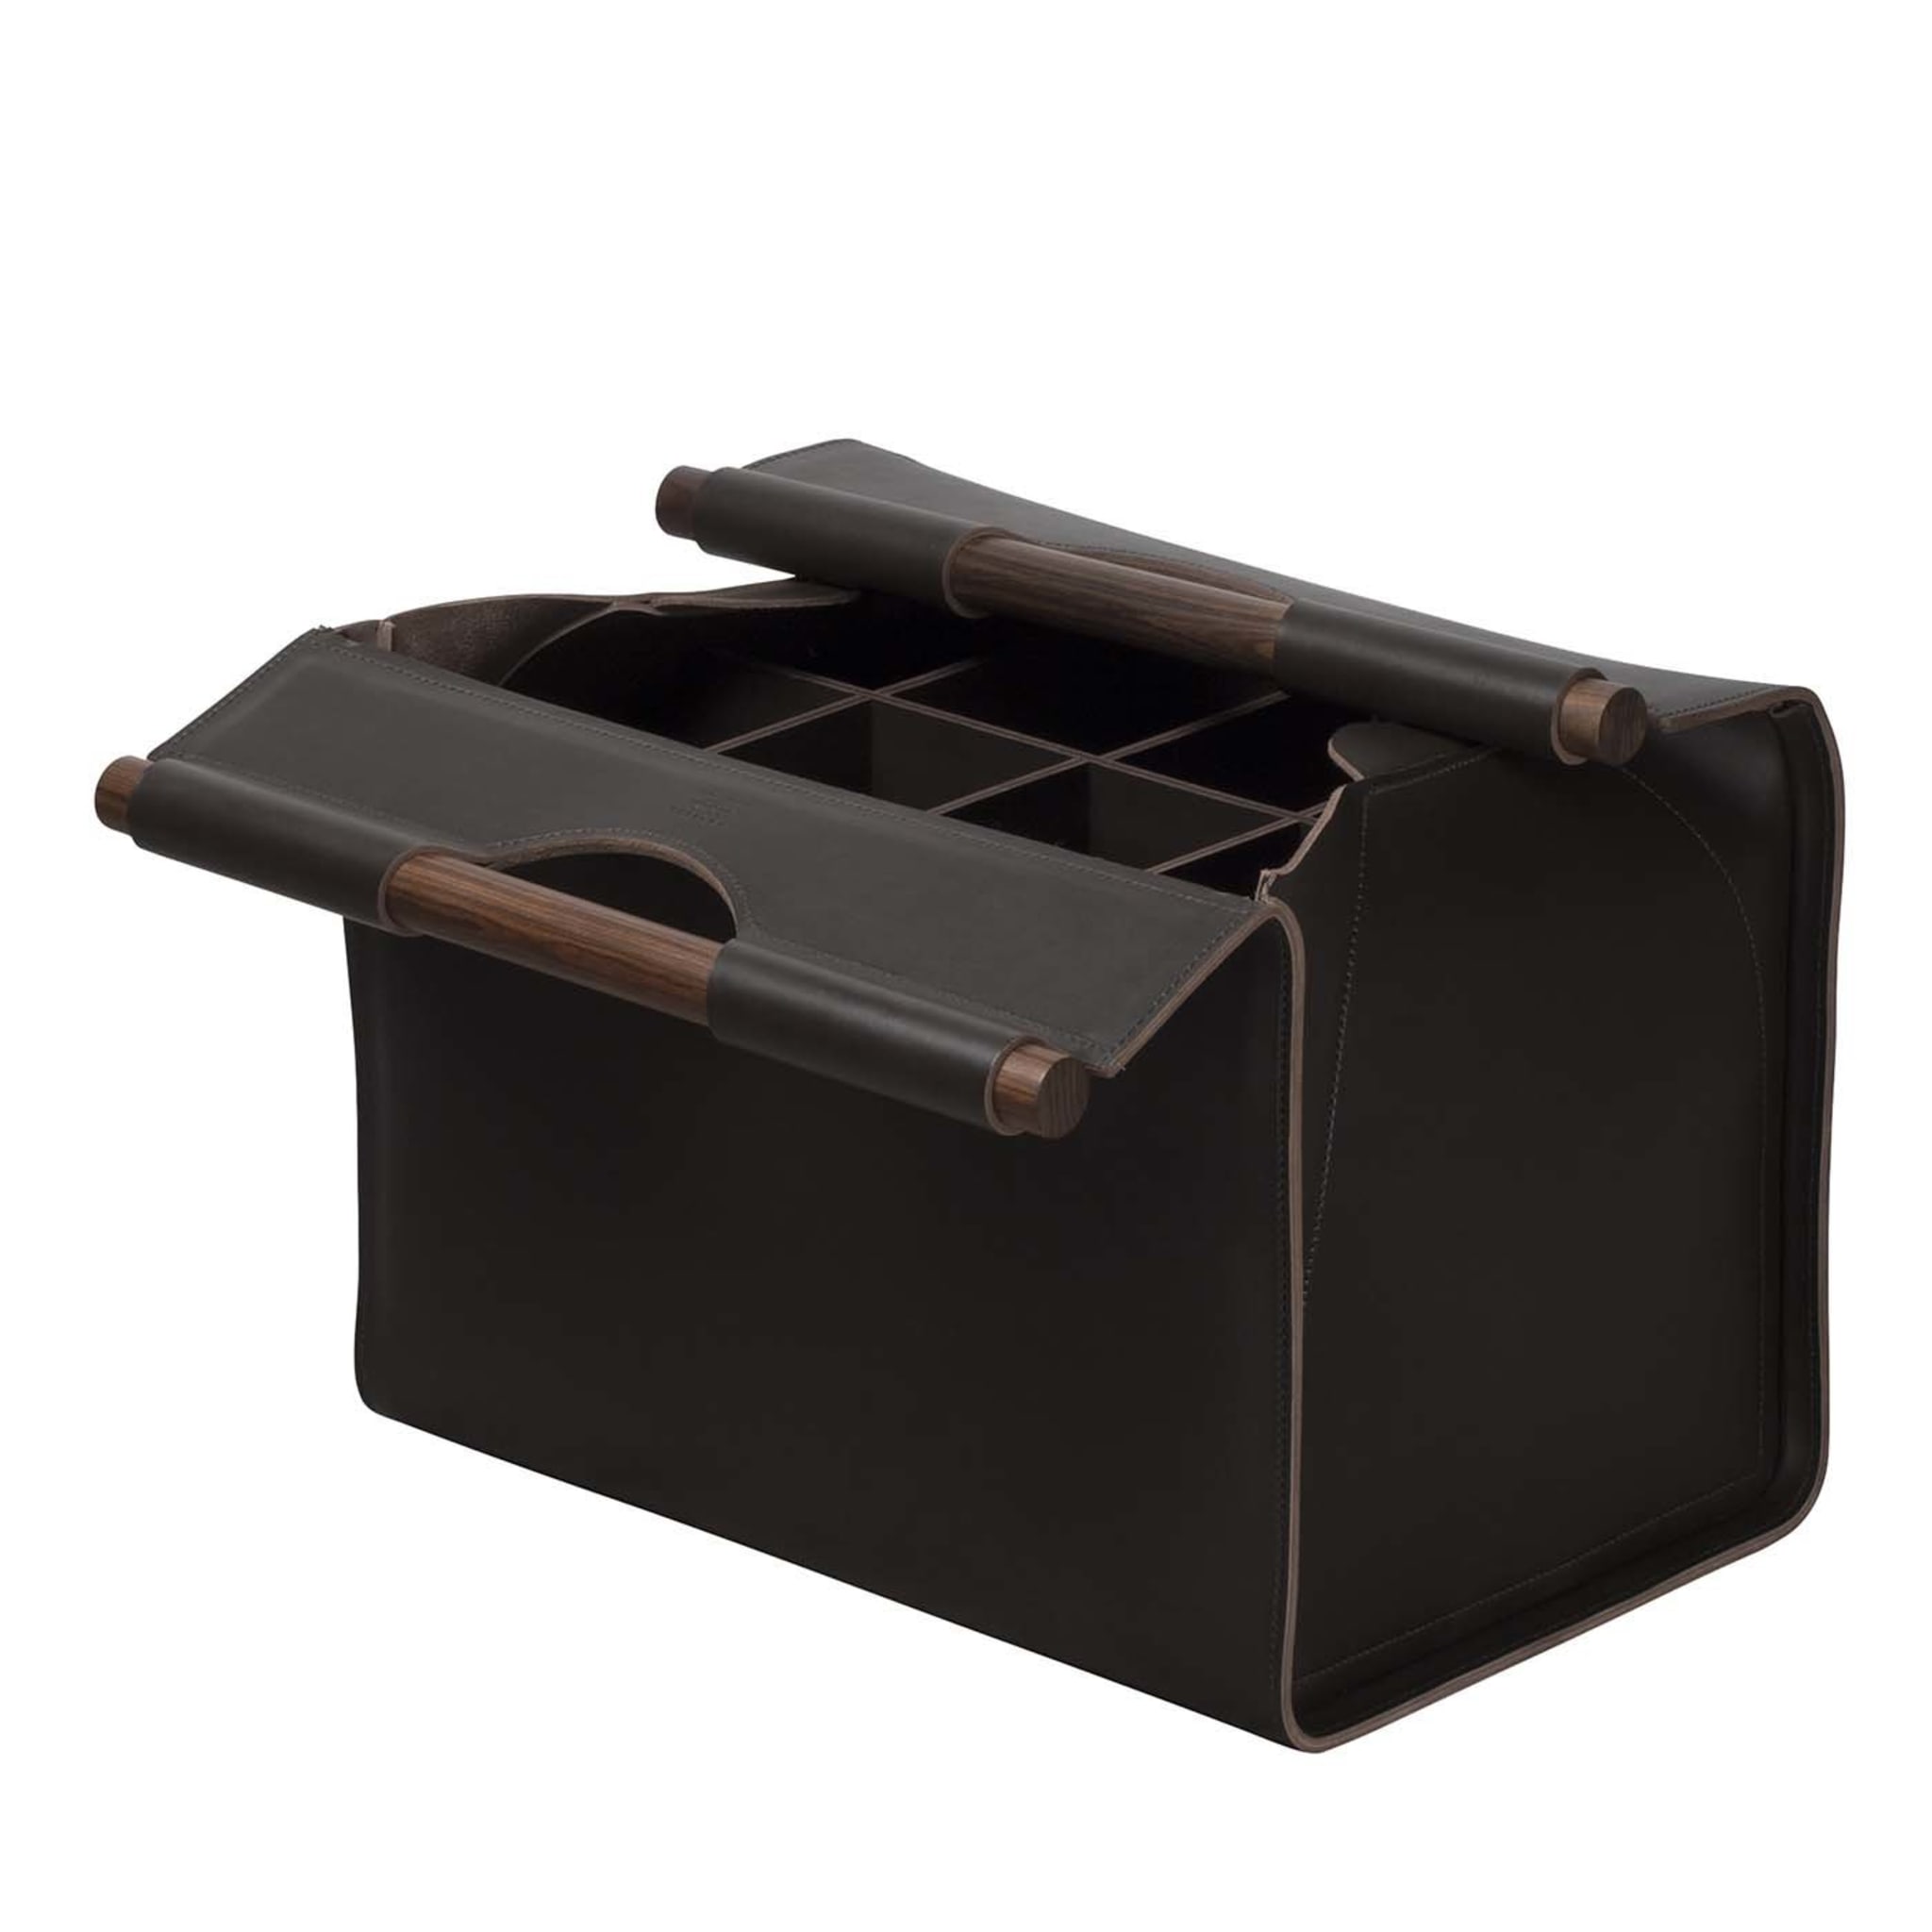 Jota Rectangular 8-Compartment Basket in Brown Leather - Main view